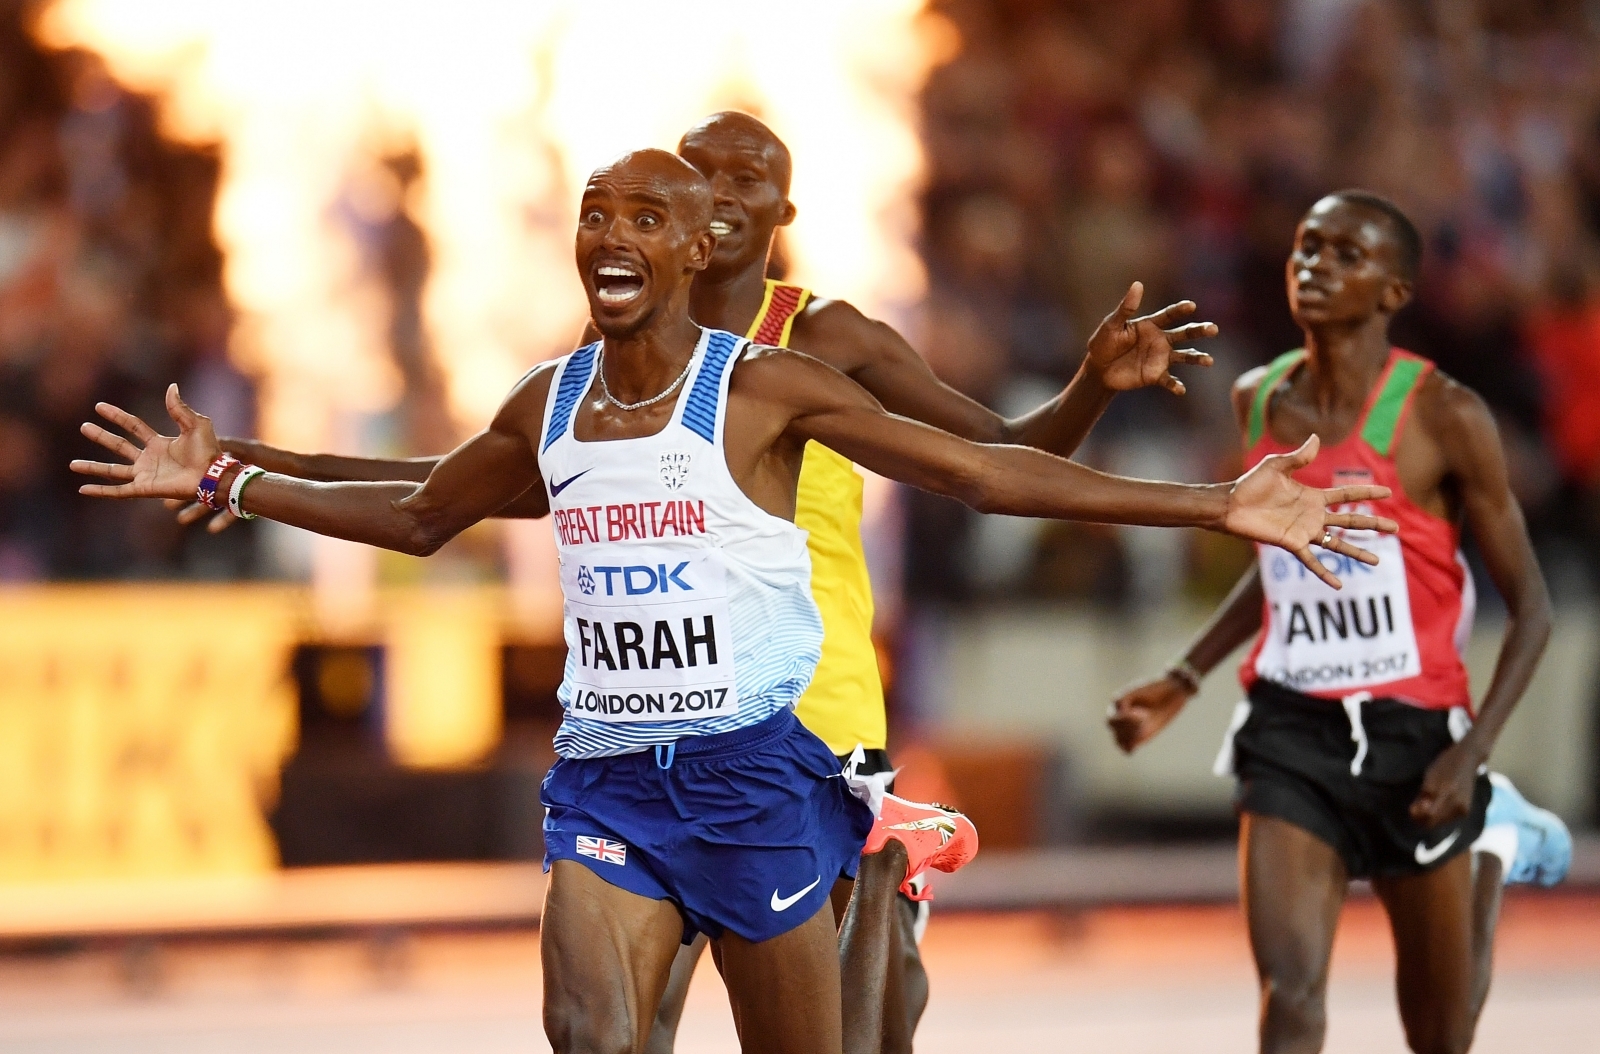 Mo Farah storms to 10,000m gold at World Athletics Championships in London